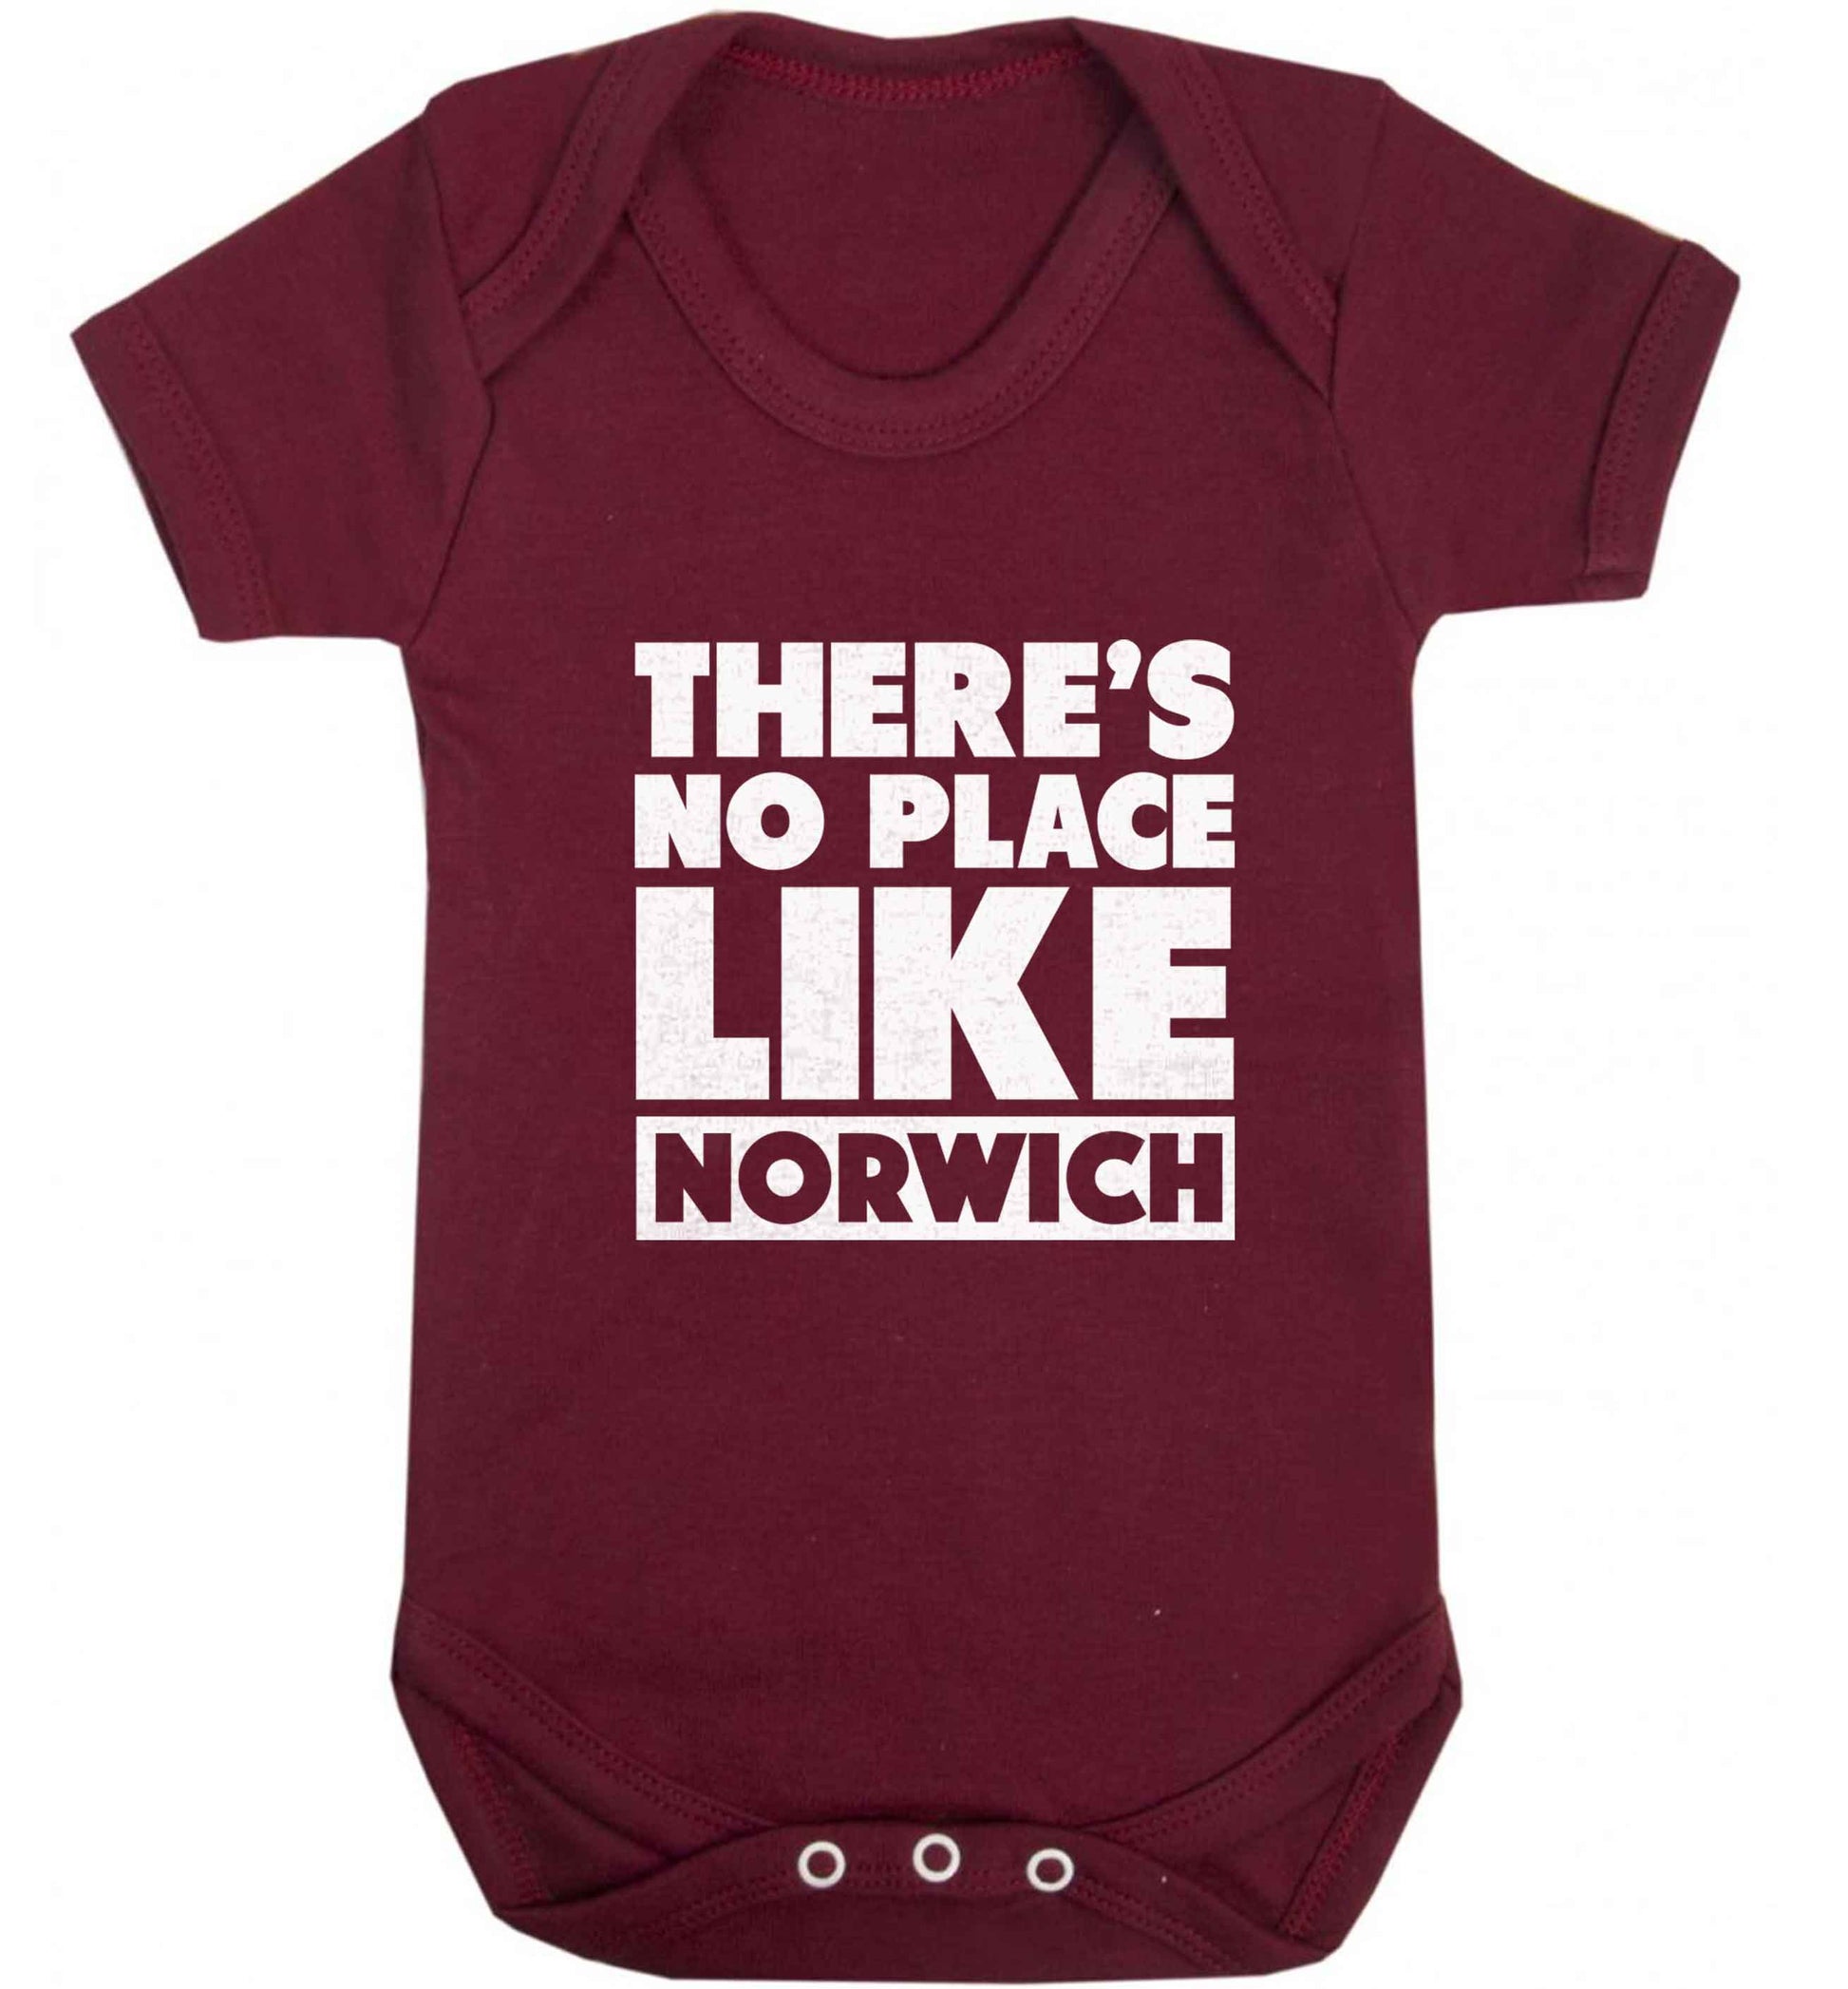 There's no place like Norwich baby vest maroon 18-24 months